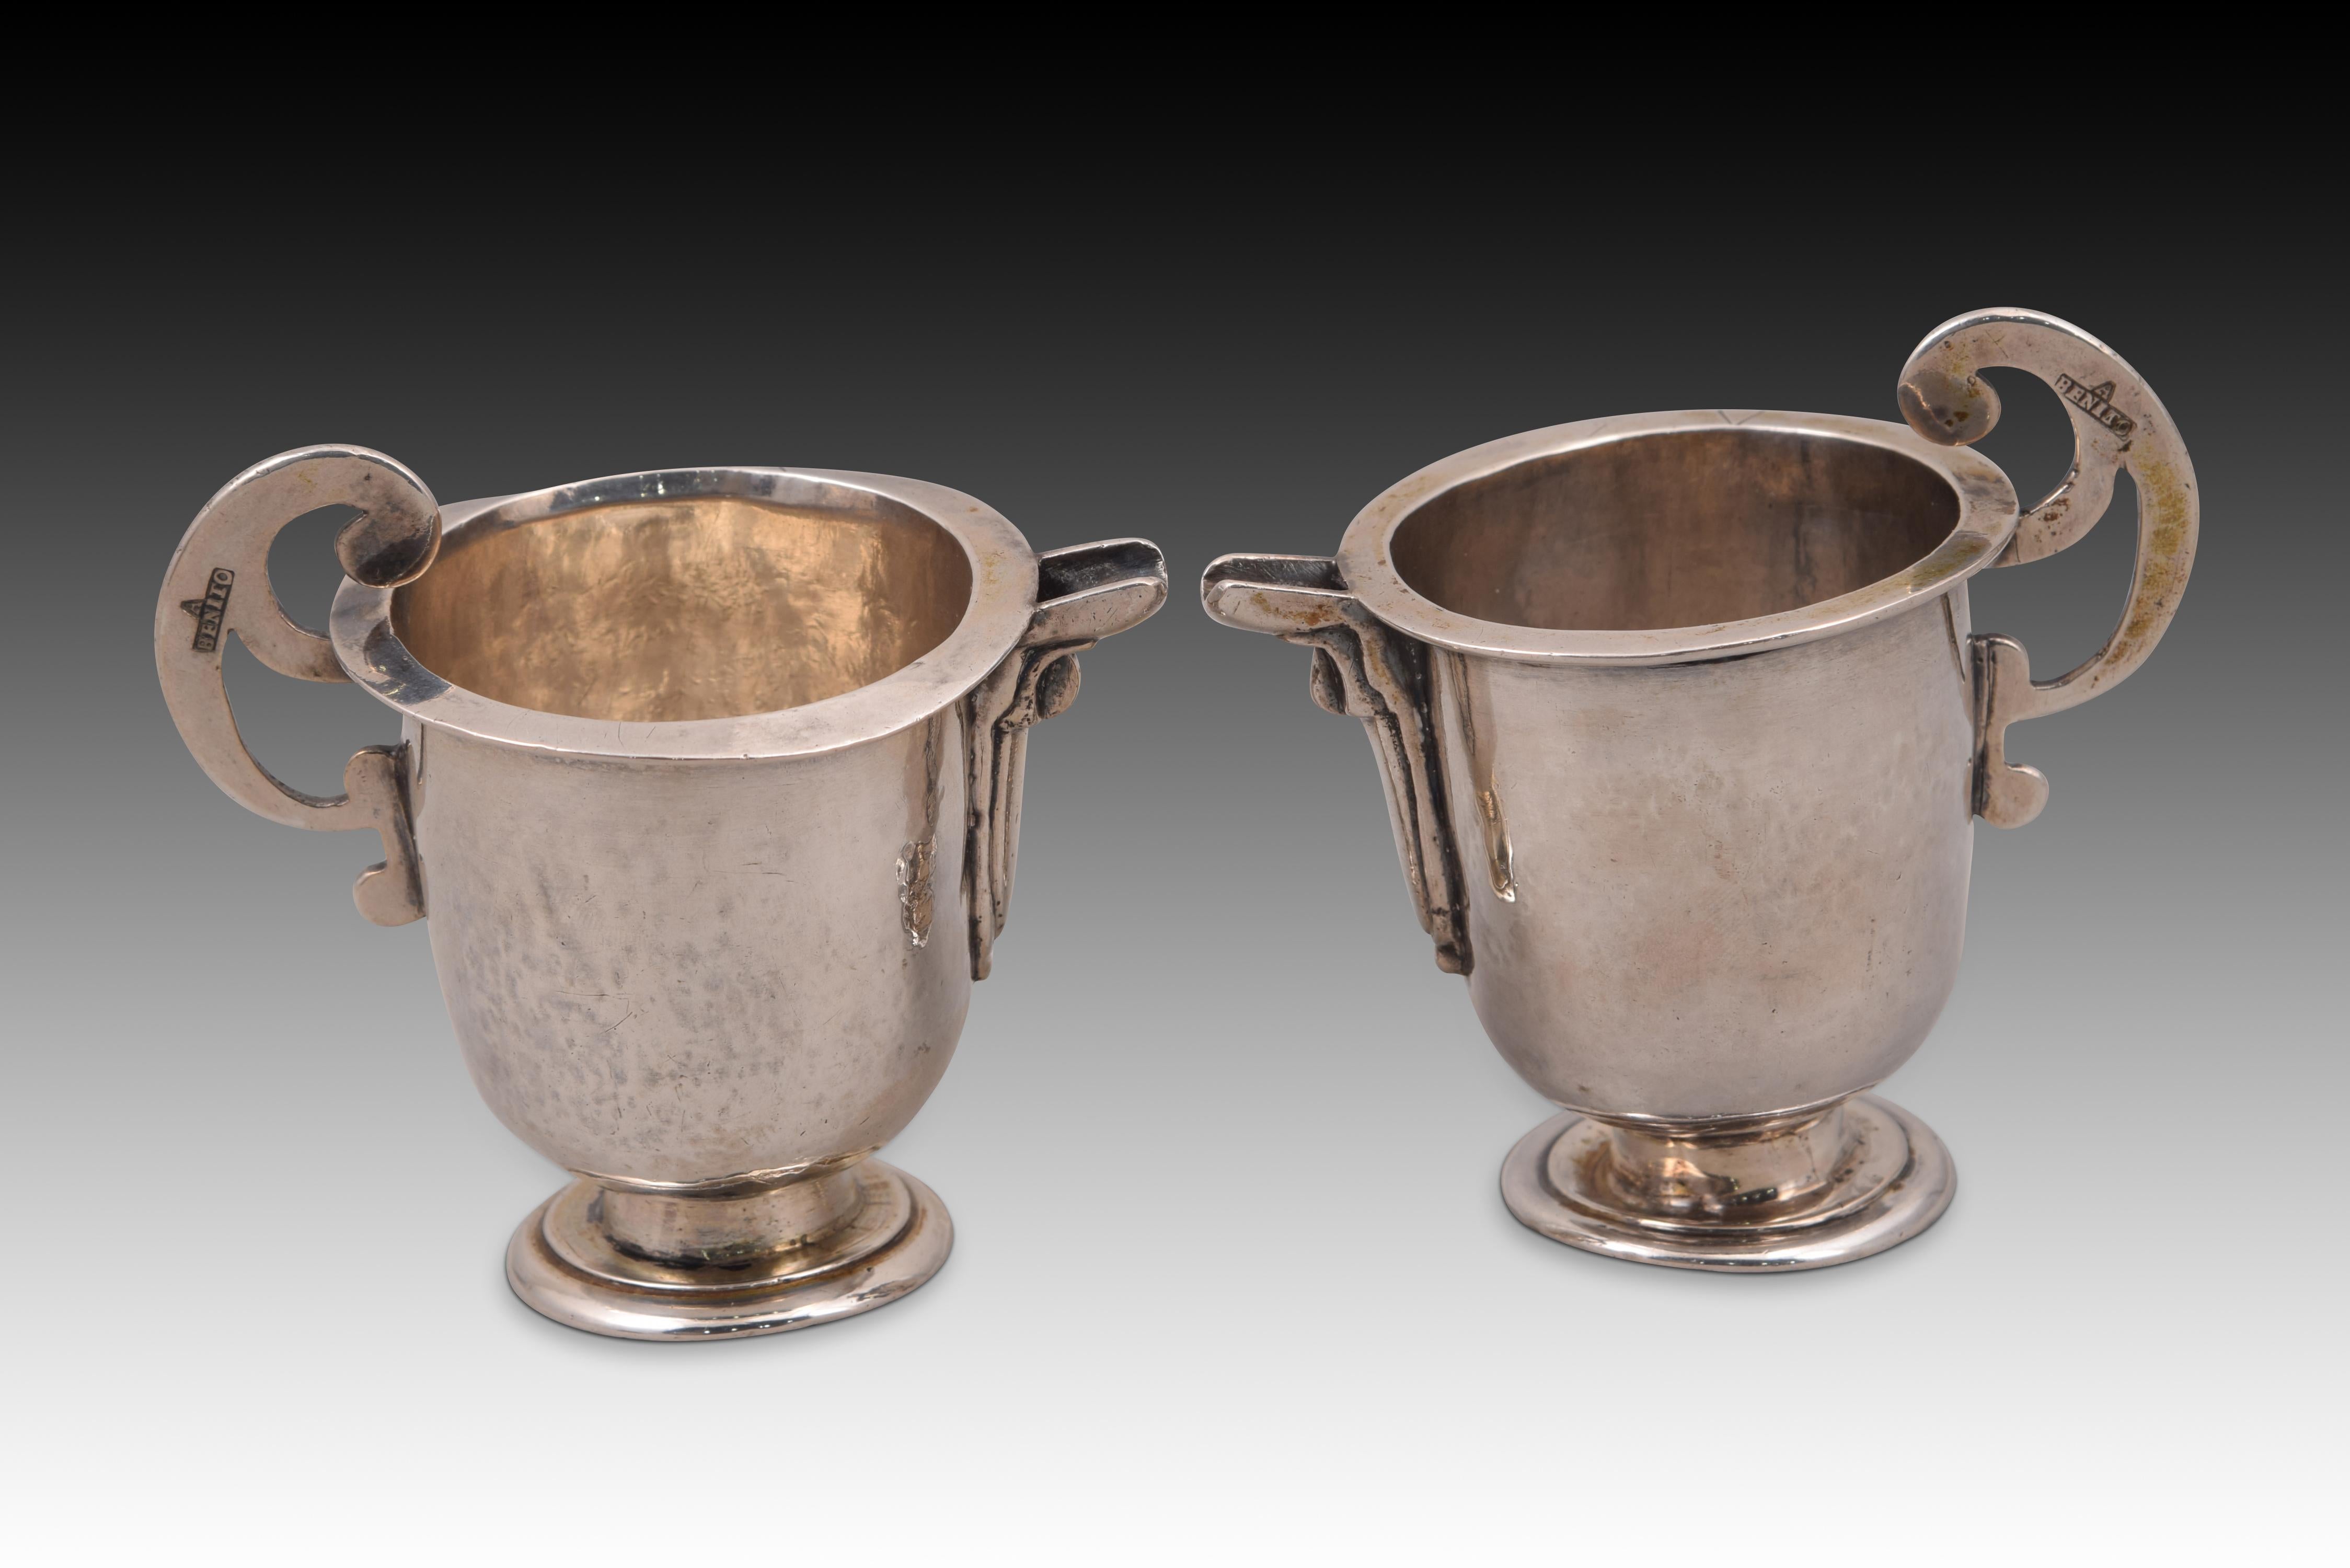 Pair of pitcher jugs. Silver. BENITO GOMEZ, Antonio (1775-1835). Segovia, Spain, 1801-1835.
 With contrast markings. 
Pair of spouted jugs with a circular base with moldings, a low conical foot and a tubular body finished in a hemisphere at the